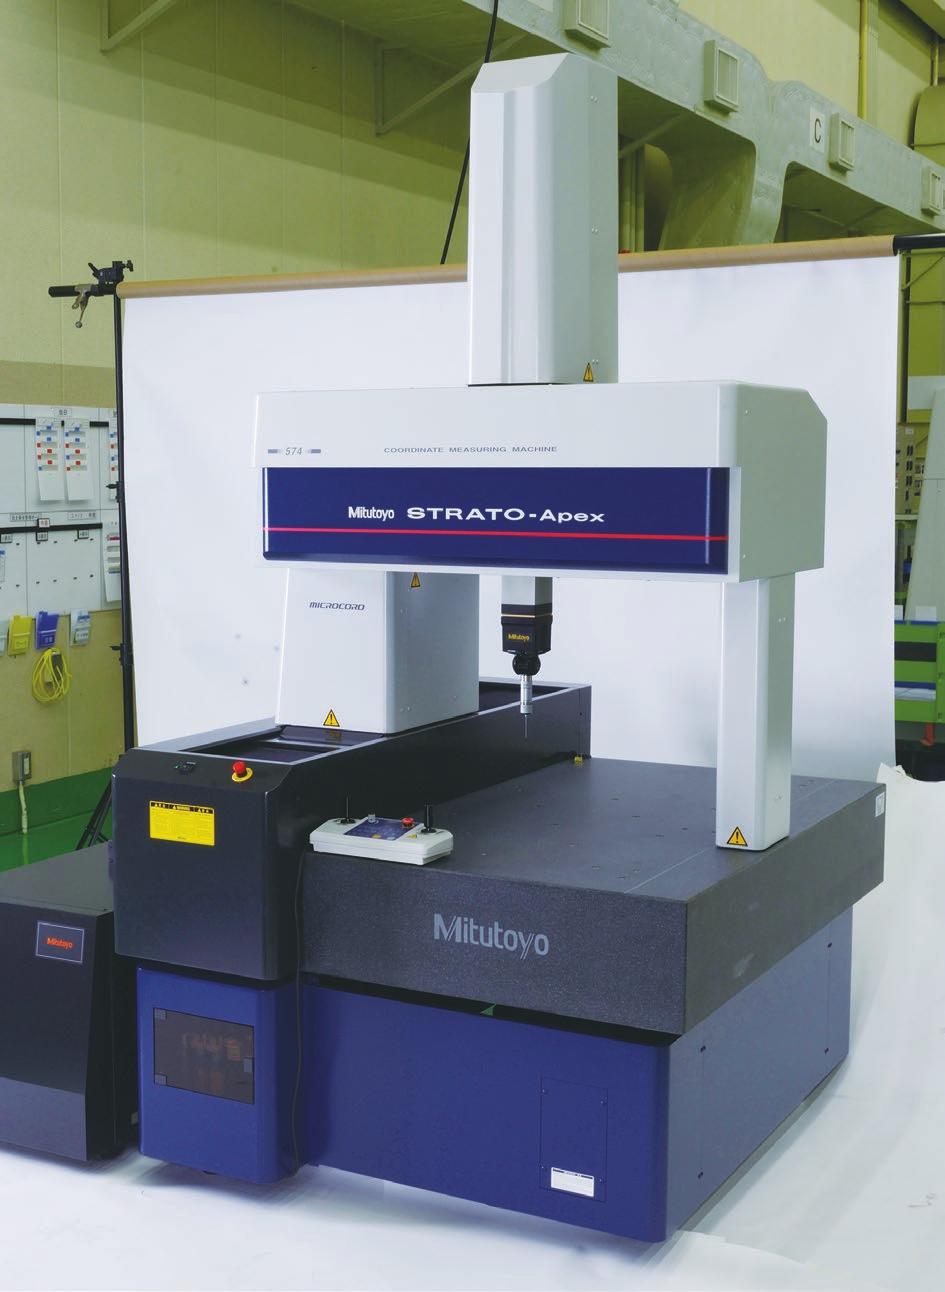 The high drive speed and acceleration guarantee top scanning performance in a machine that also offers high-accuracy measuring in the 1 μm class.